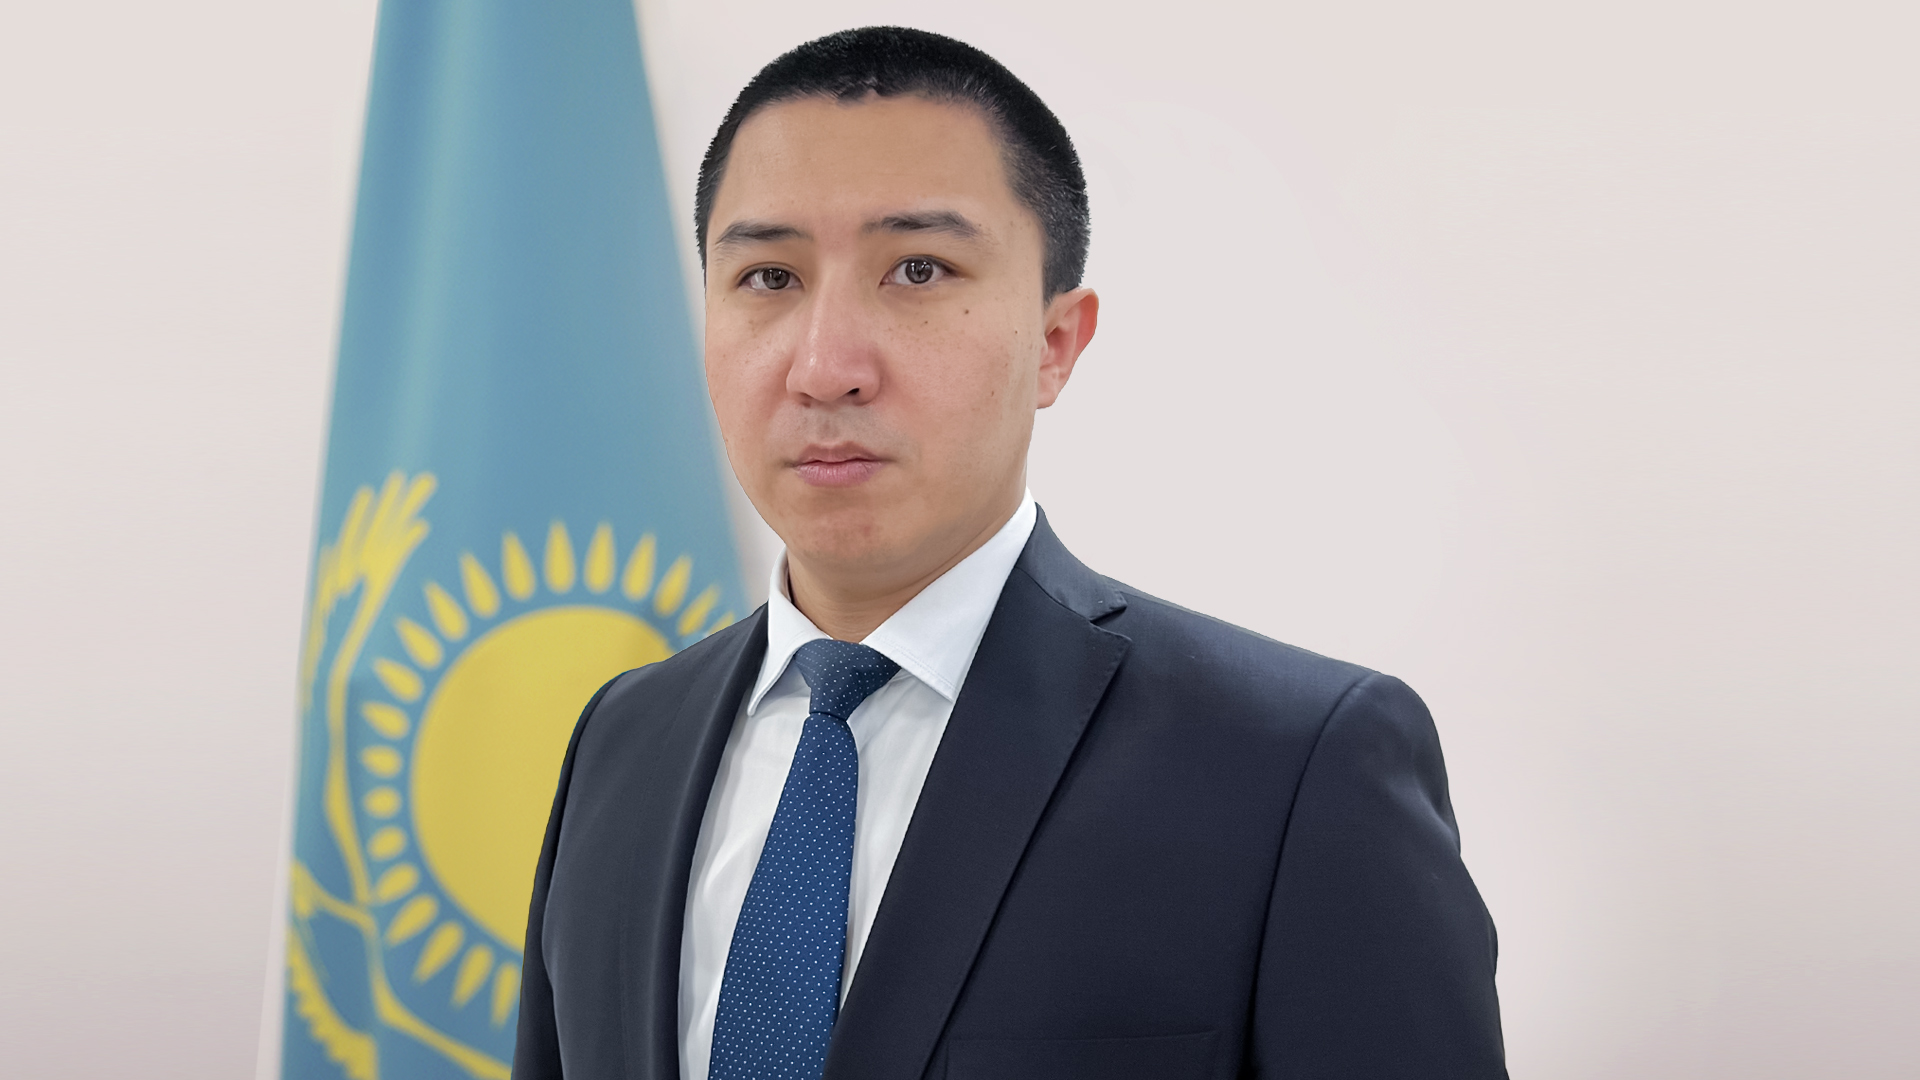 Berik Manasov appointed Chairman of the State Inspection Committee in the agro-industrial complex of the Ministry of Agriculture of the Republic of Kazakhstan